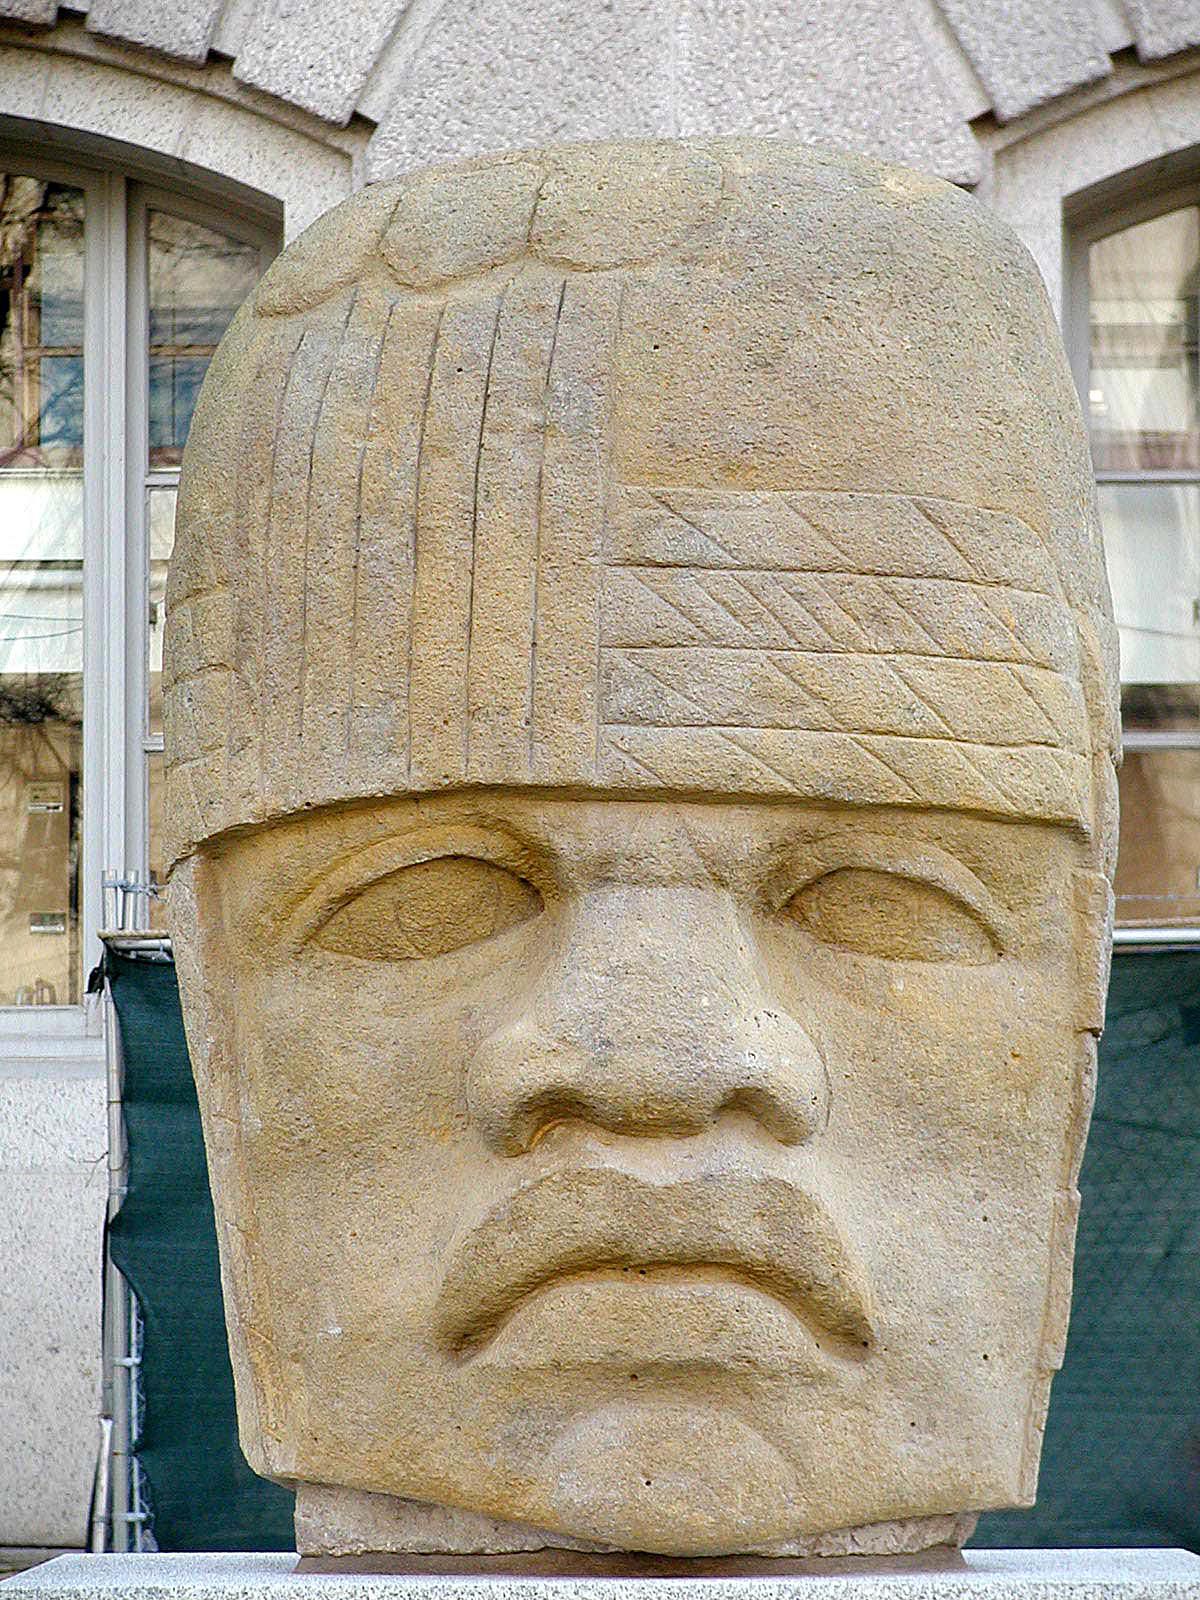 A Timeline and History of the Olmec Civilization